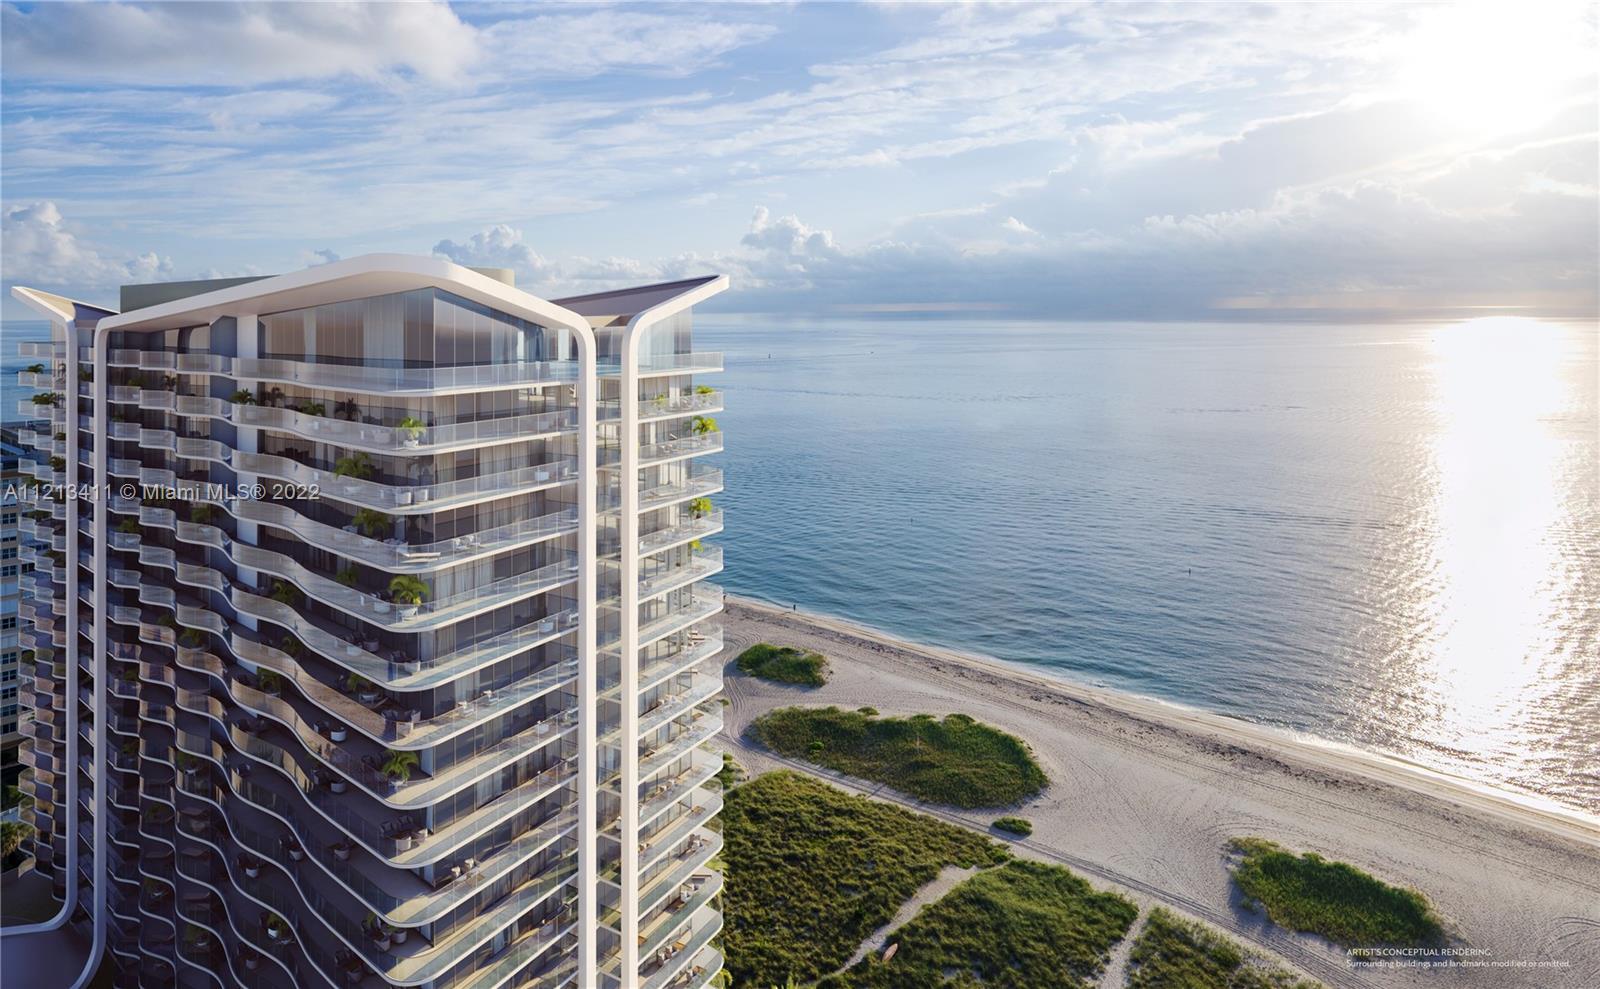 Located on 283 linear feet of pristine oceanfront, Related Group's newest property, Casamar, is the 